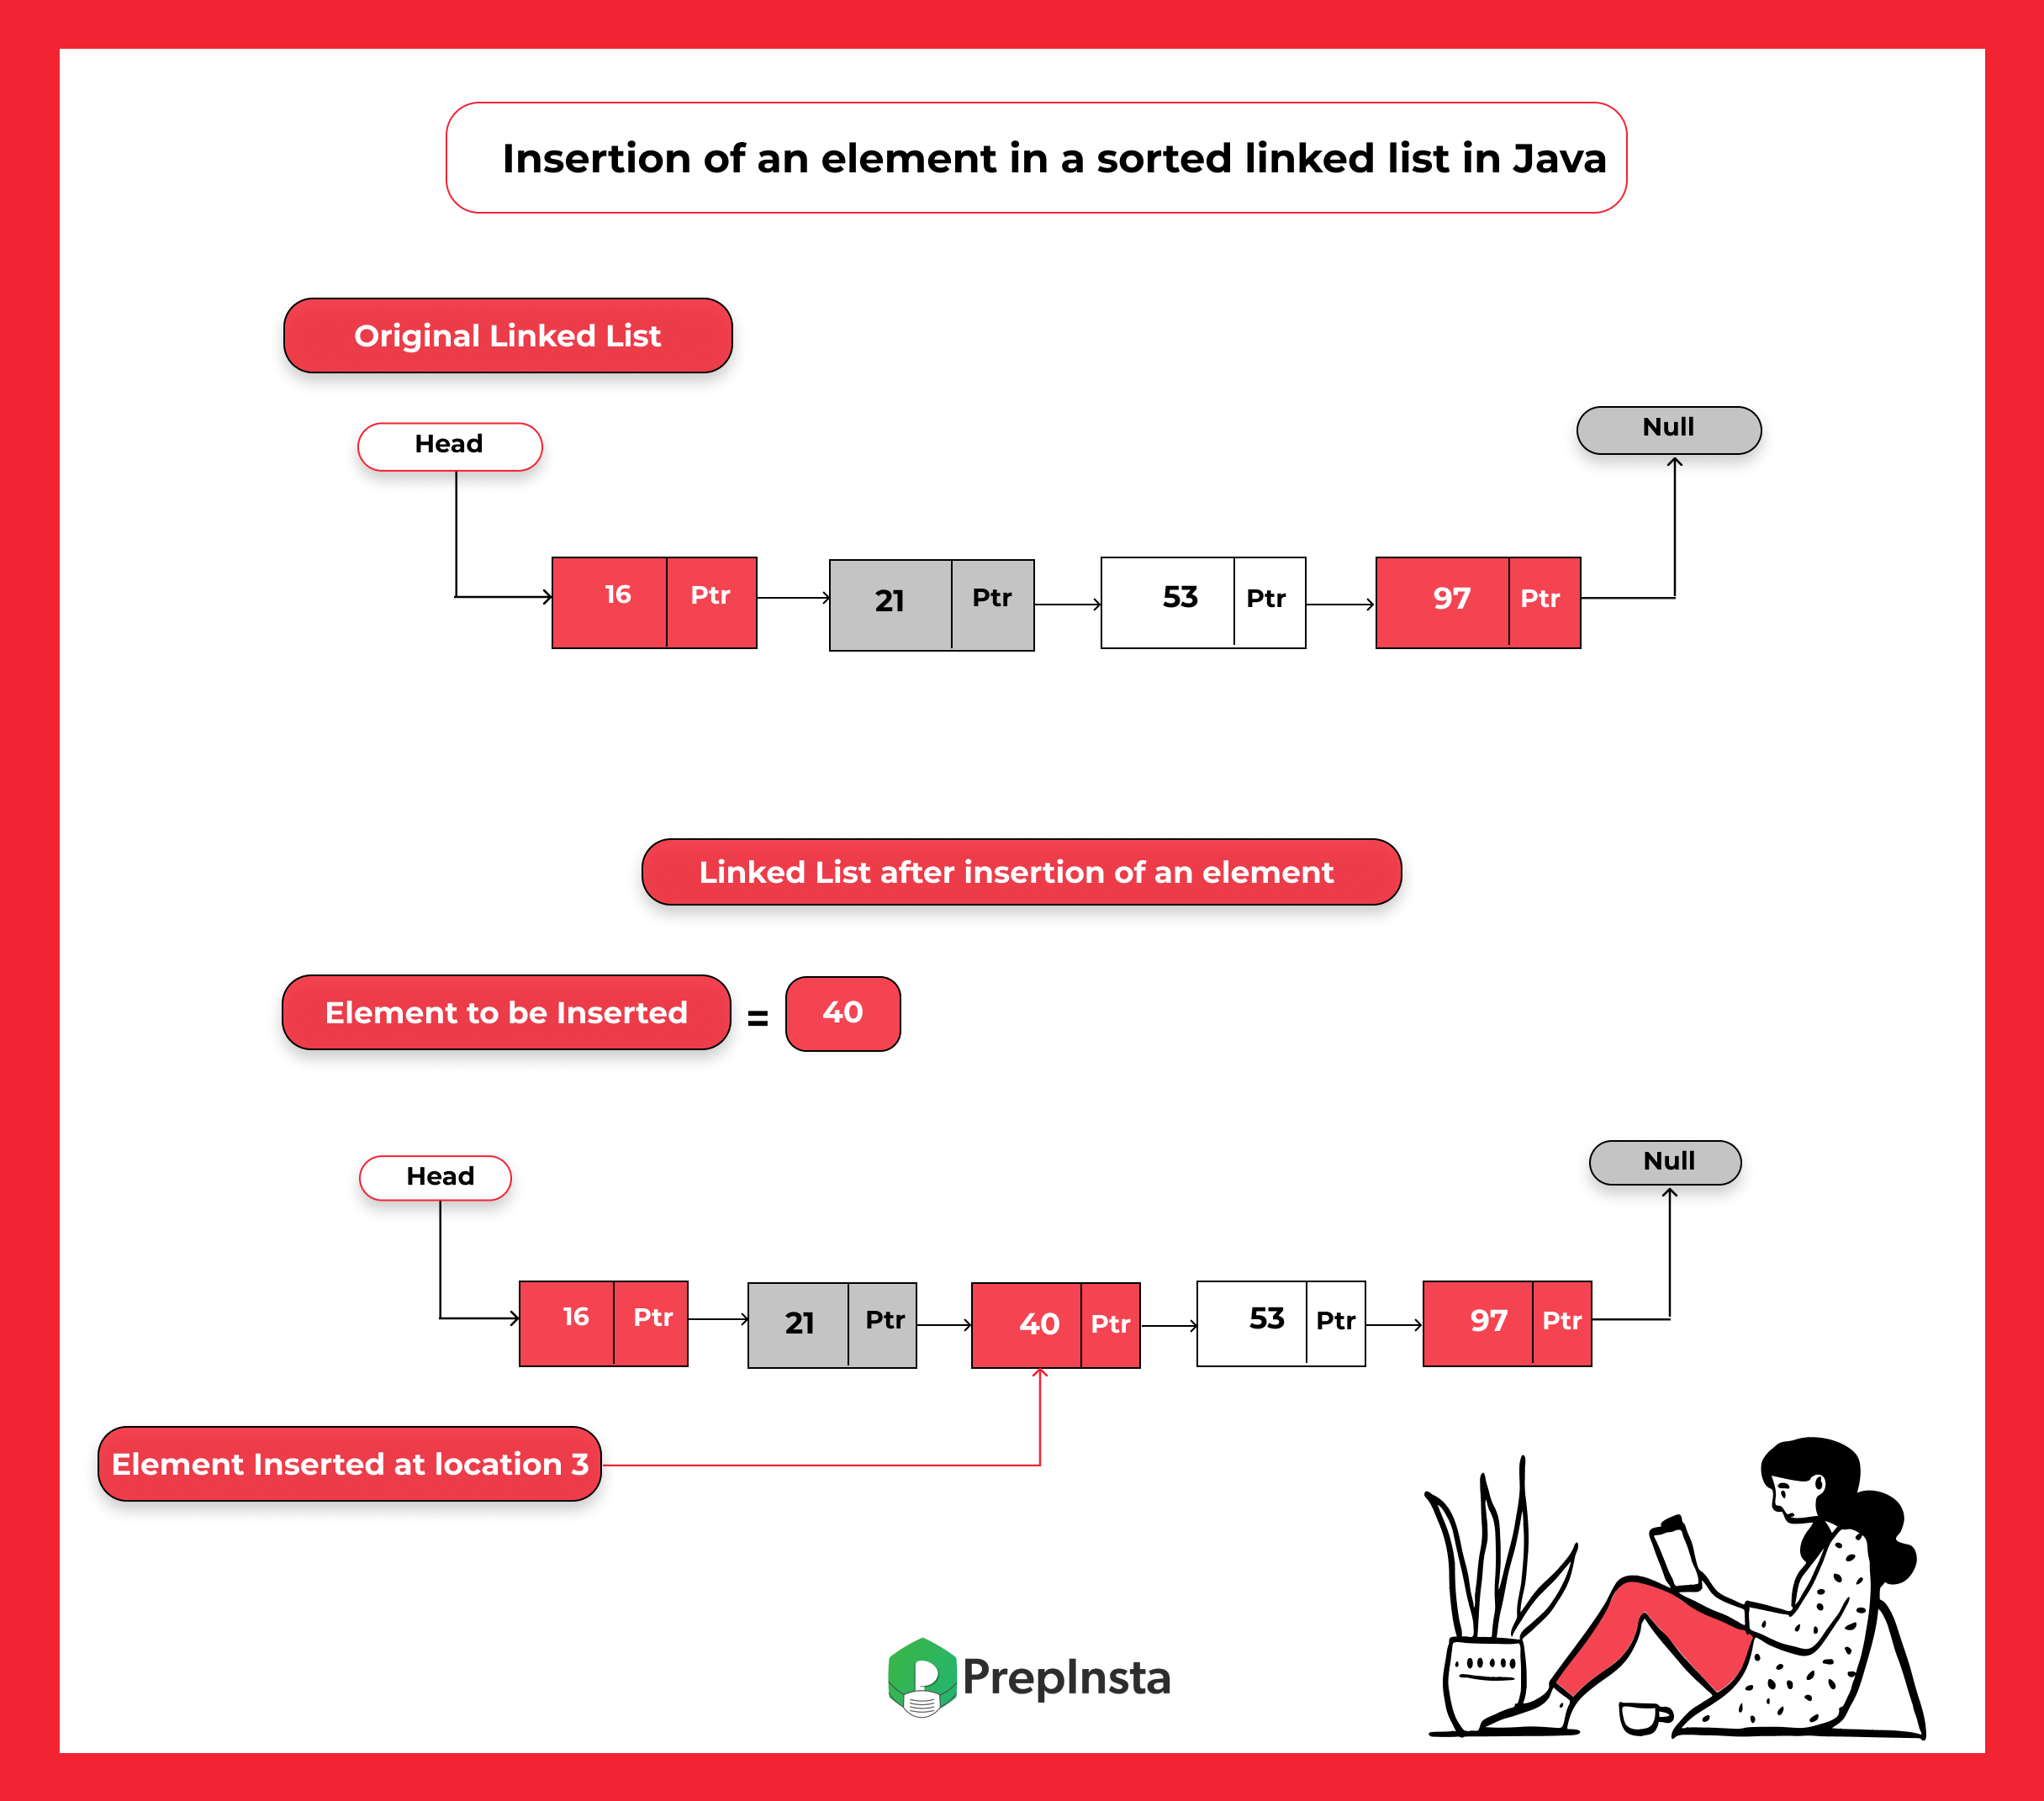 Insertion-of-an-element-in-an-sorted-linked-list-in-Java